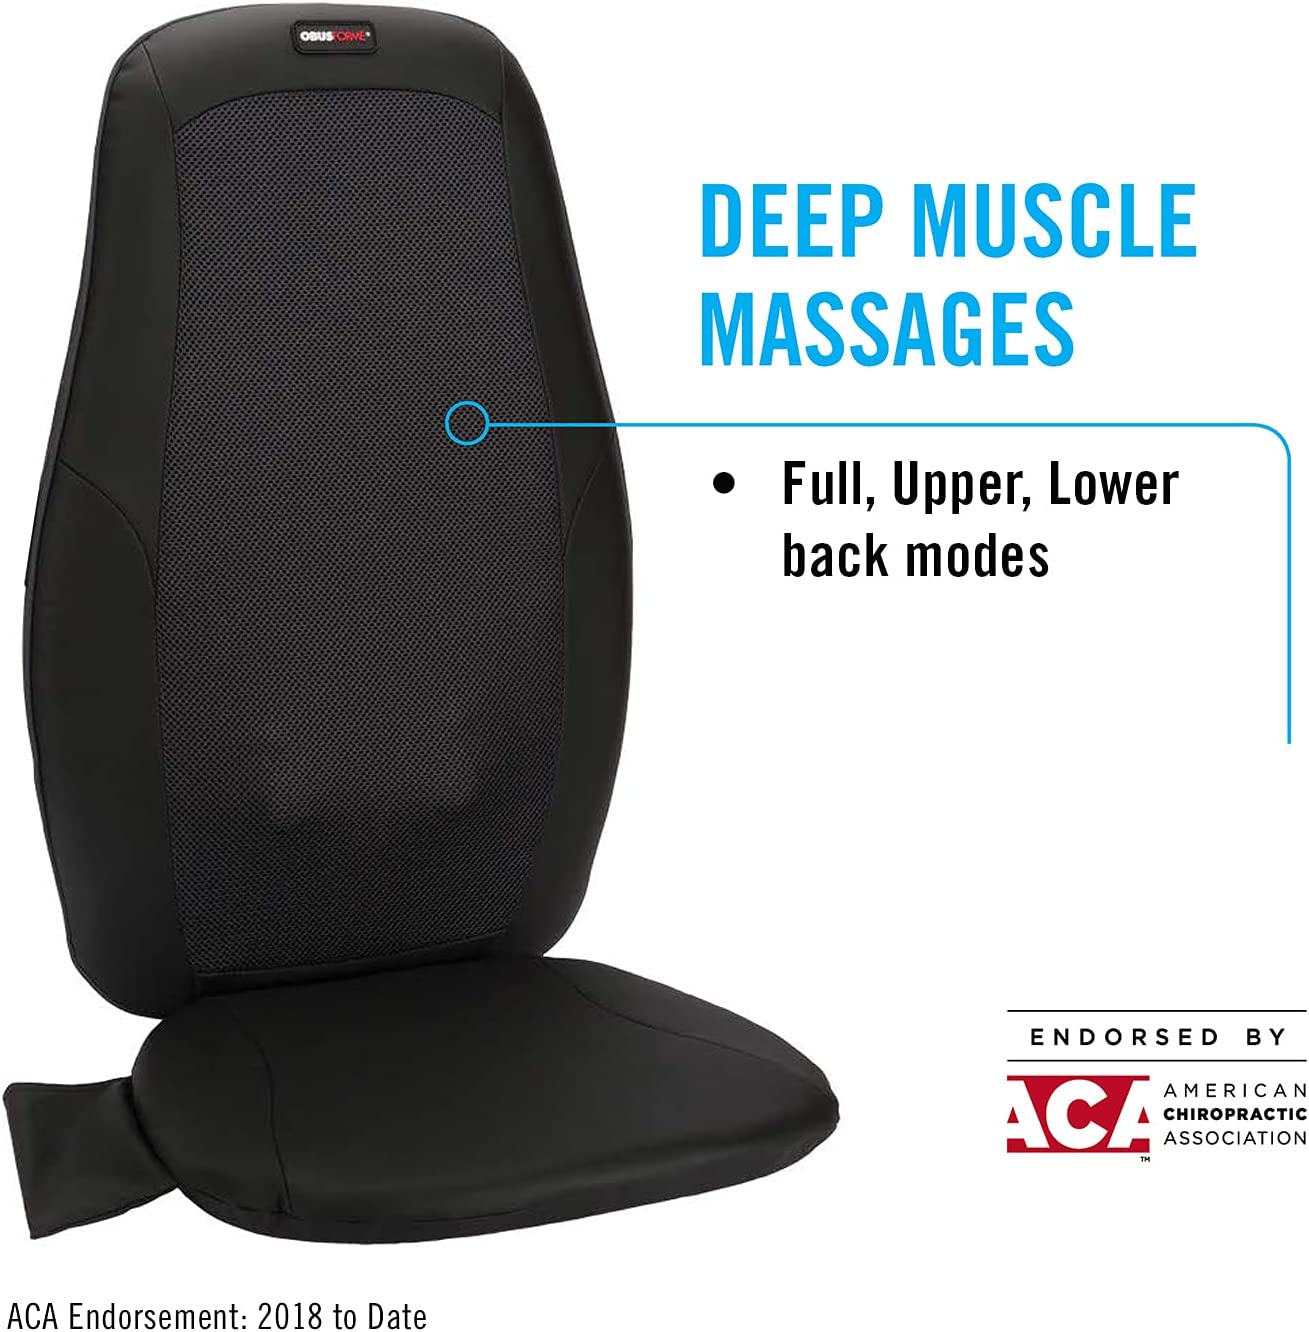 ObusForme Kneading Shiatsu Back Massager with Heat | 3 Massage Zones - Upper, Lower or Full Back